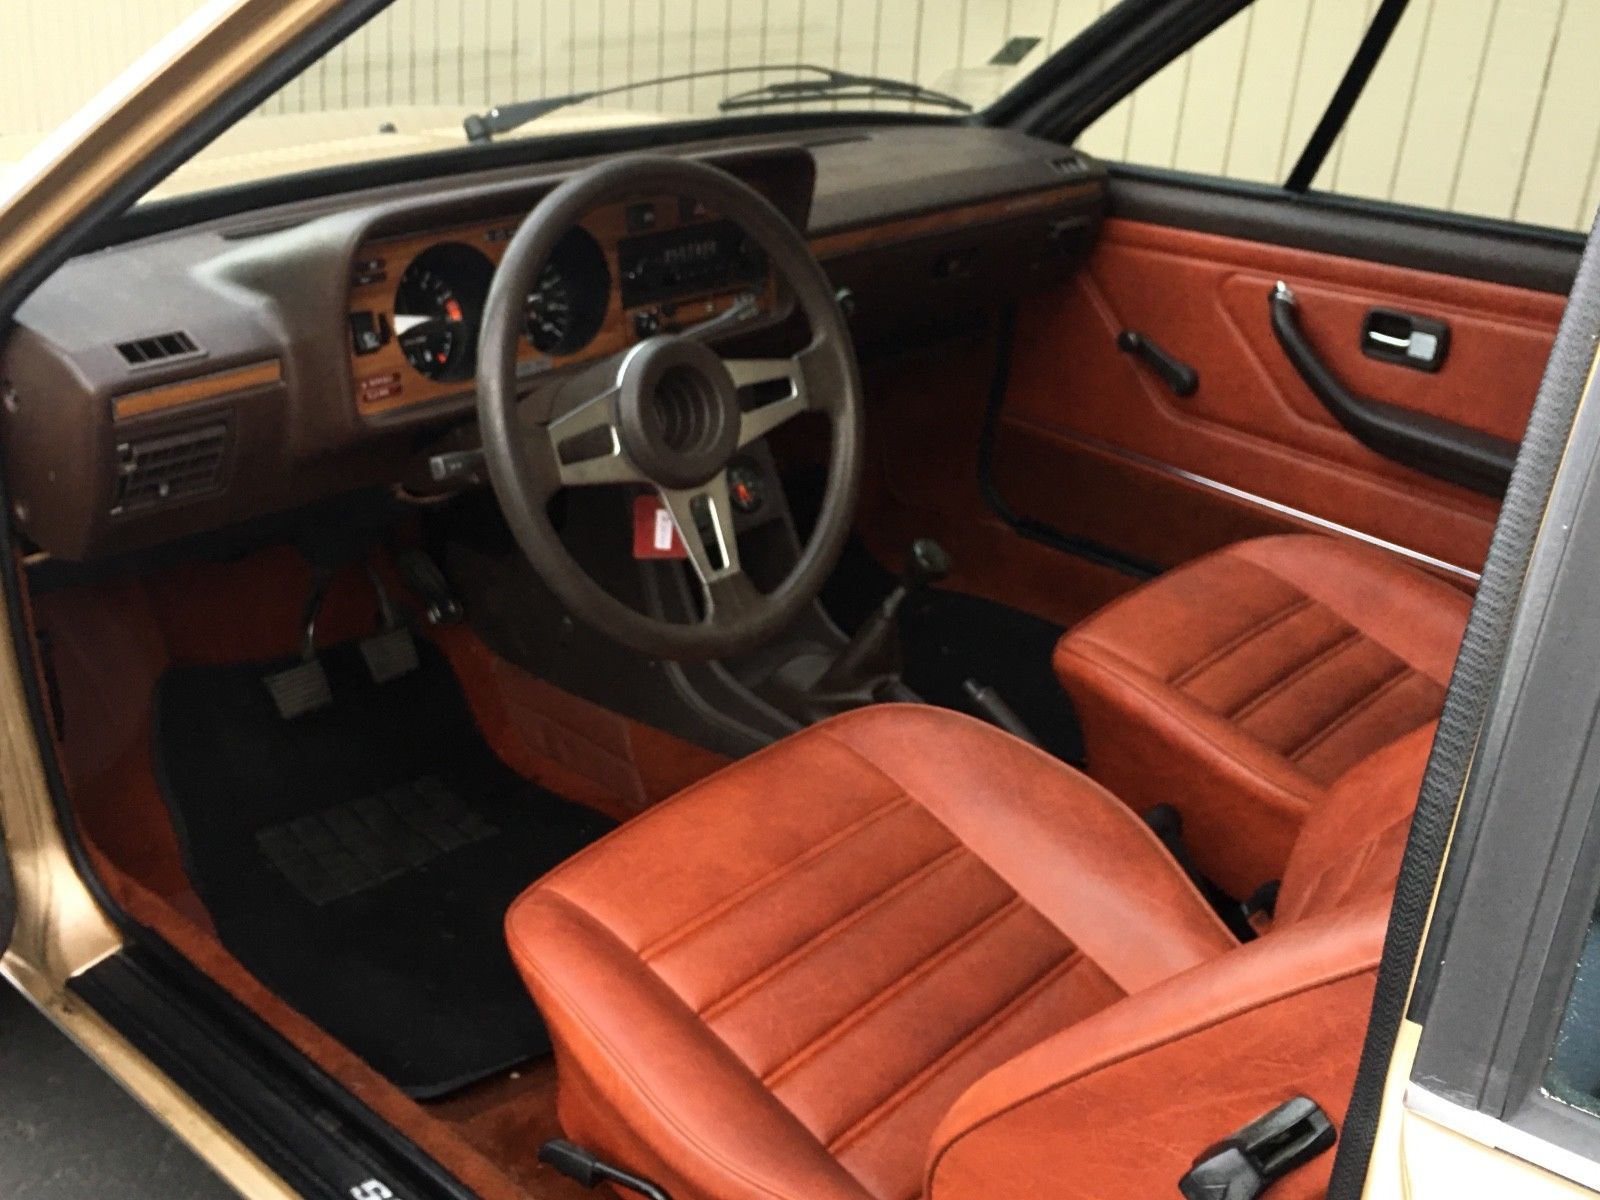 1978 Volkswagen Scirocco With 27 000 Miles German Cars For Sale Blog